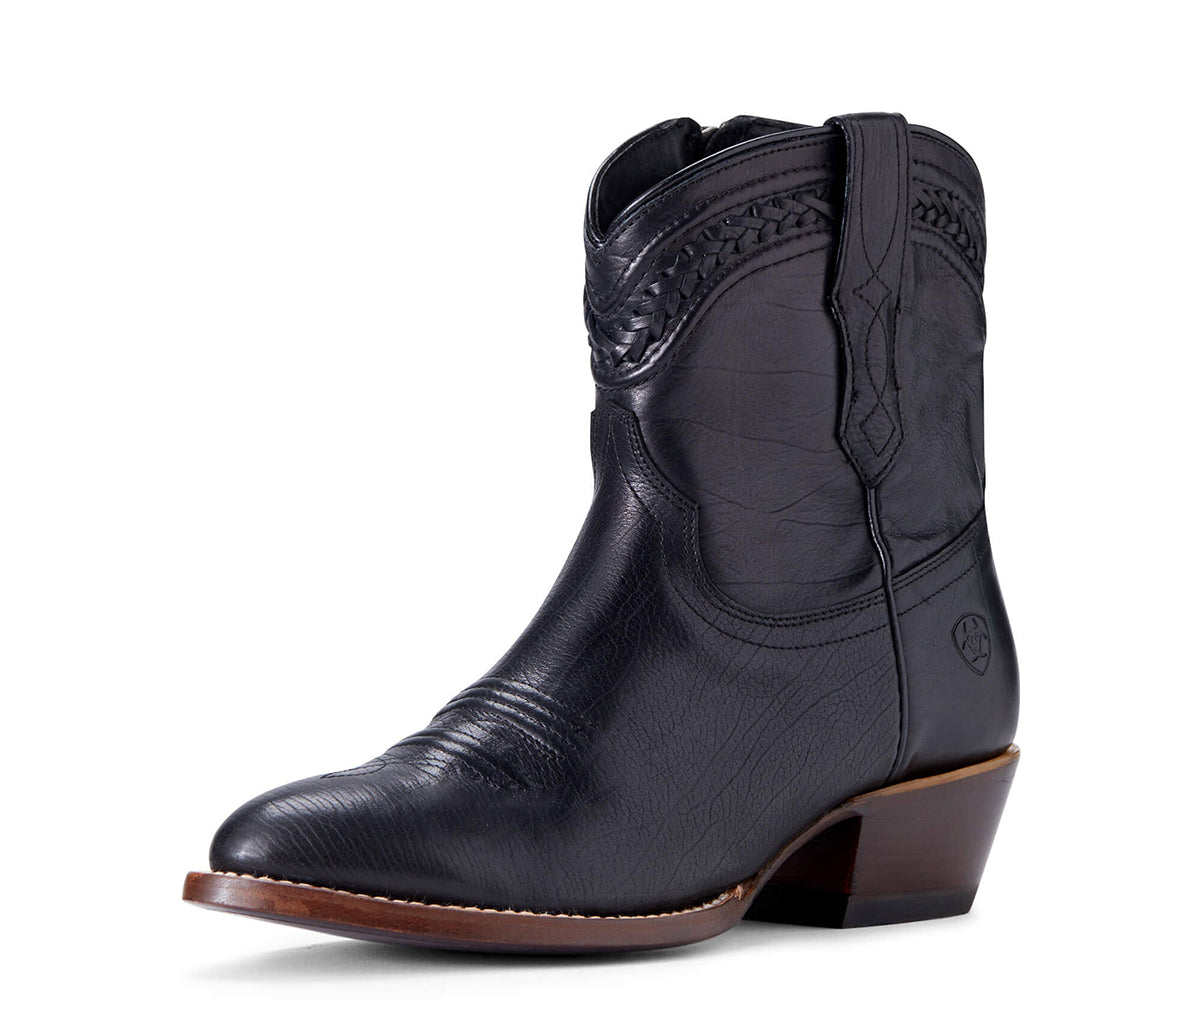 Women's Ariat Legacy R Toe Western Boot in True Black from the front